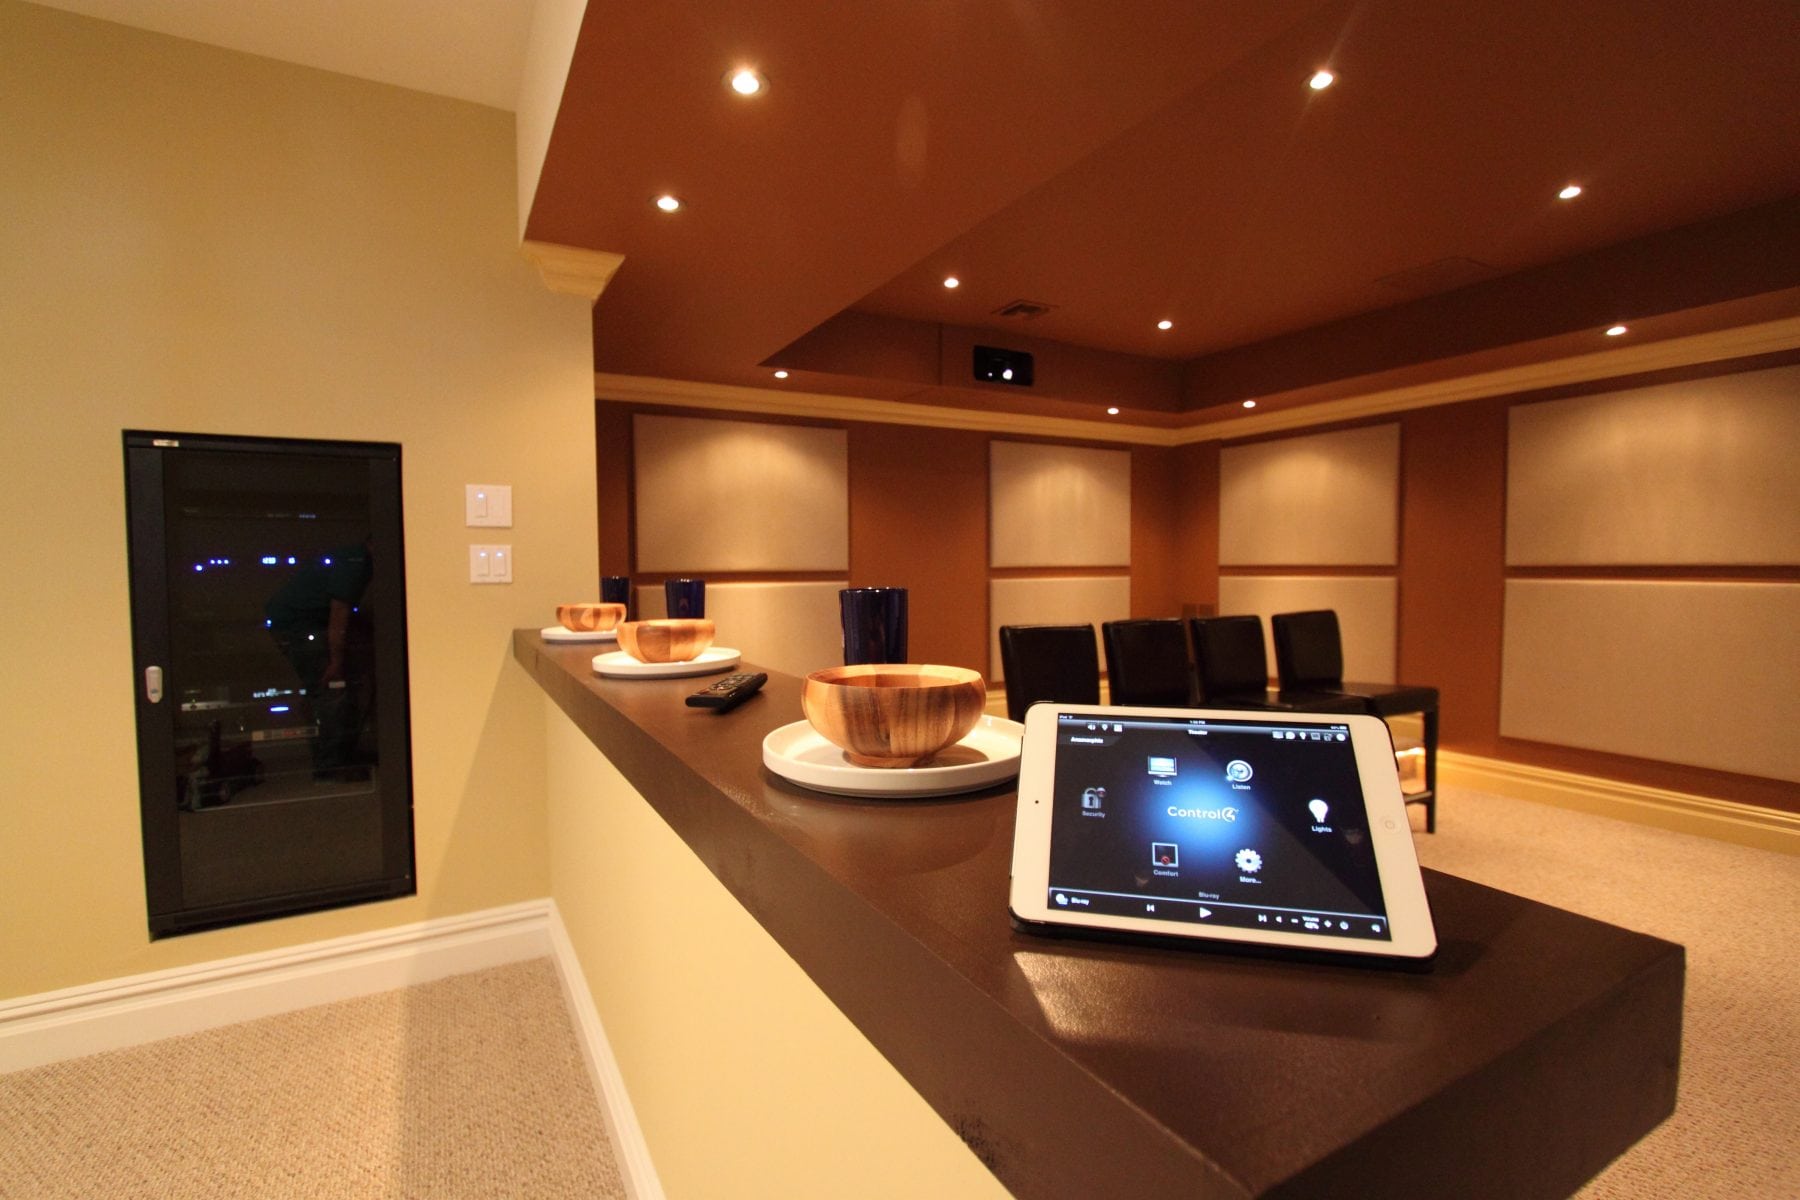 Let’s Get Started with Home Automation Lighting | SmartHomeWorks